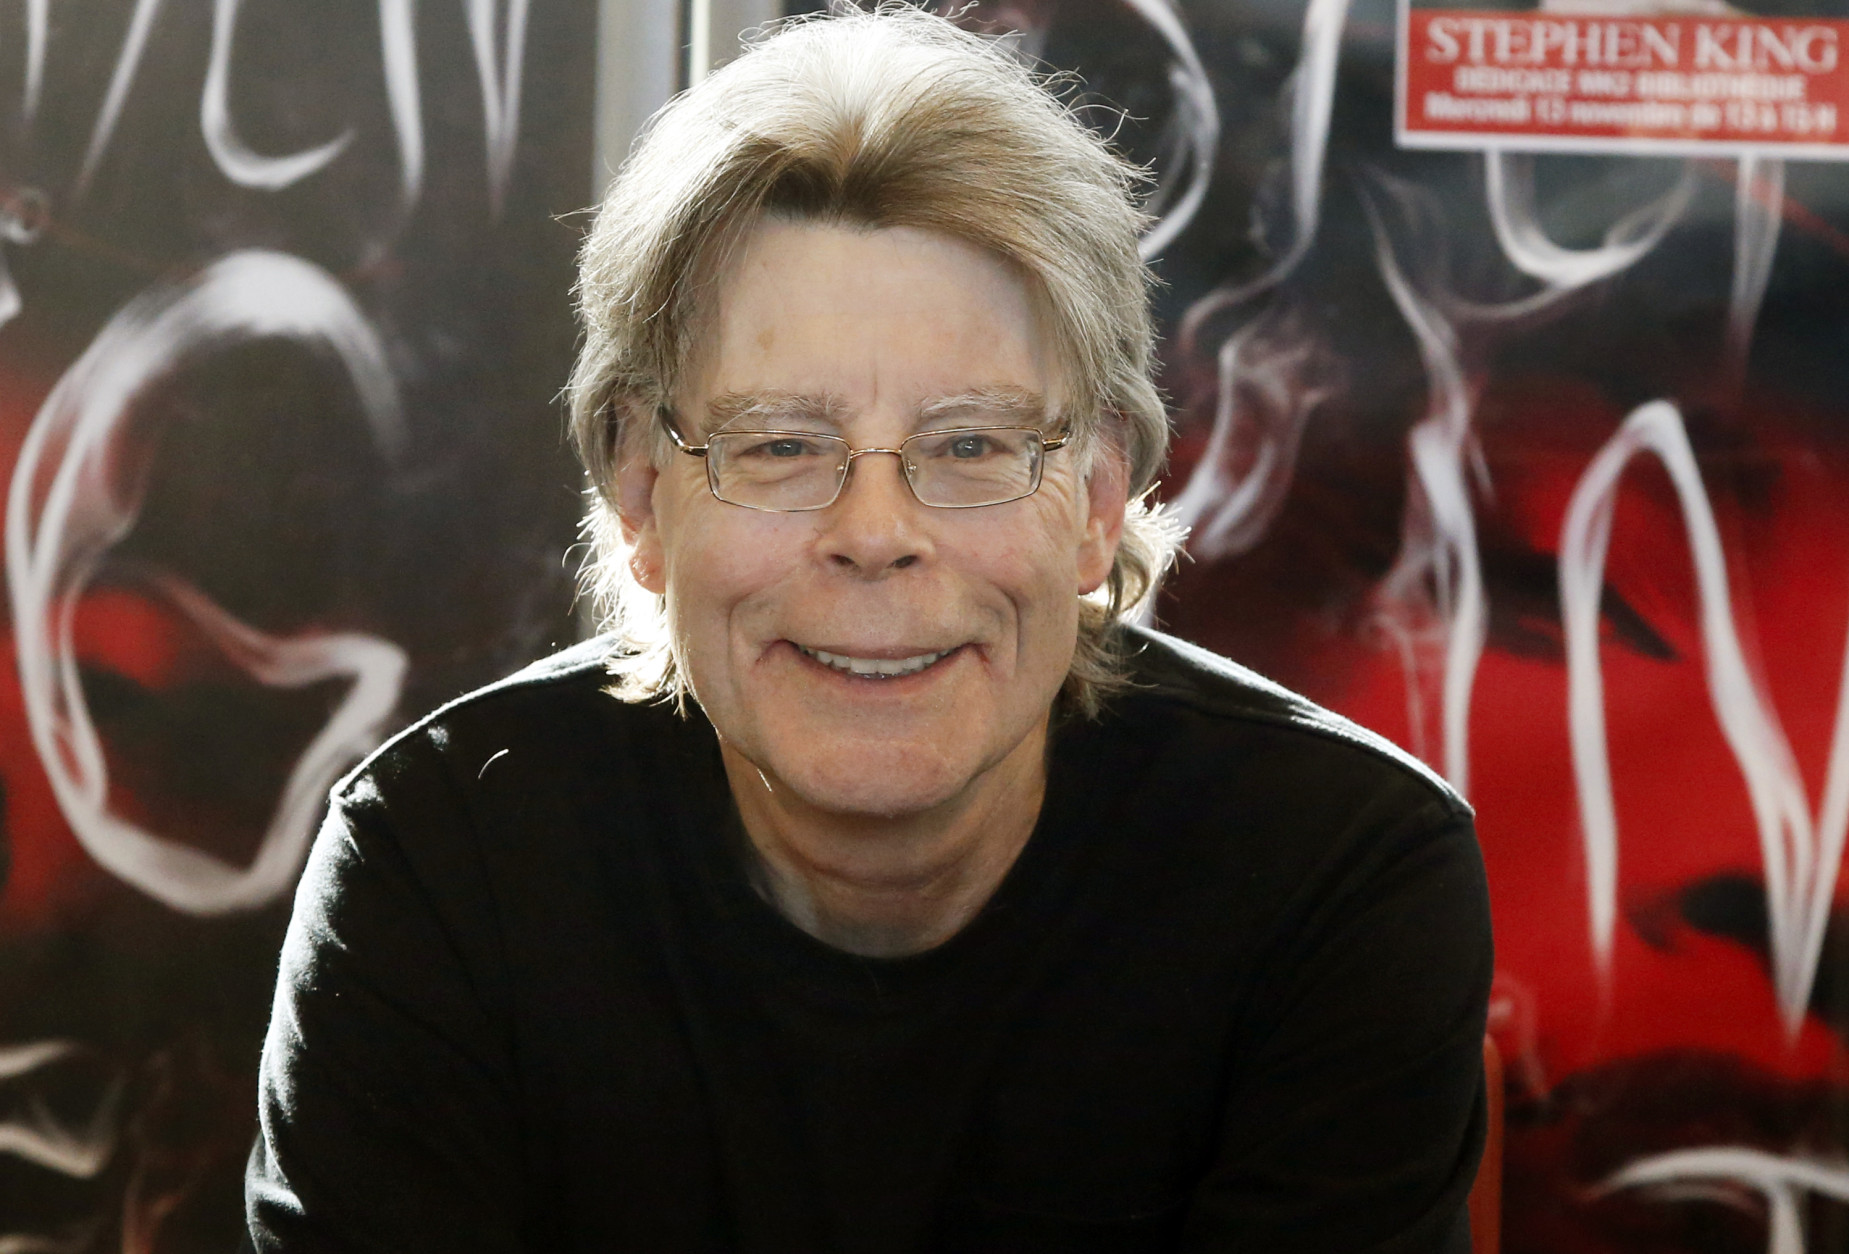 FILE - In this Nov. 13, 2013 file photo, author Stephen King poses for the cameras, during a promotional tour for his novel, "Doctor Sleep" in Paris. Kings End of Watch will be published next June, Scribner announced Thursday, Oct. 8, 2015. The novel is the third, after Mr. Mercedes and Finders Keepers, to feature retired police detective Bill Hodges.  (AP Photo/Francois Mori, File)